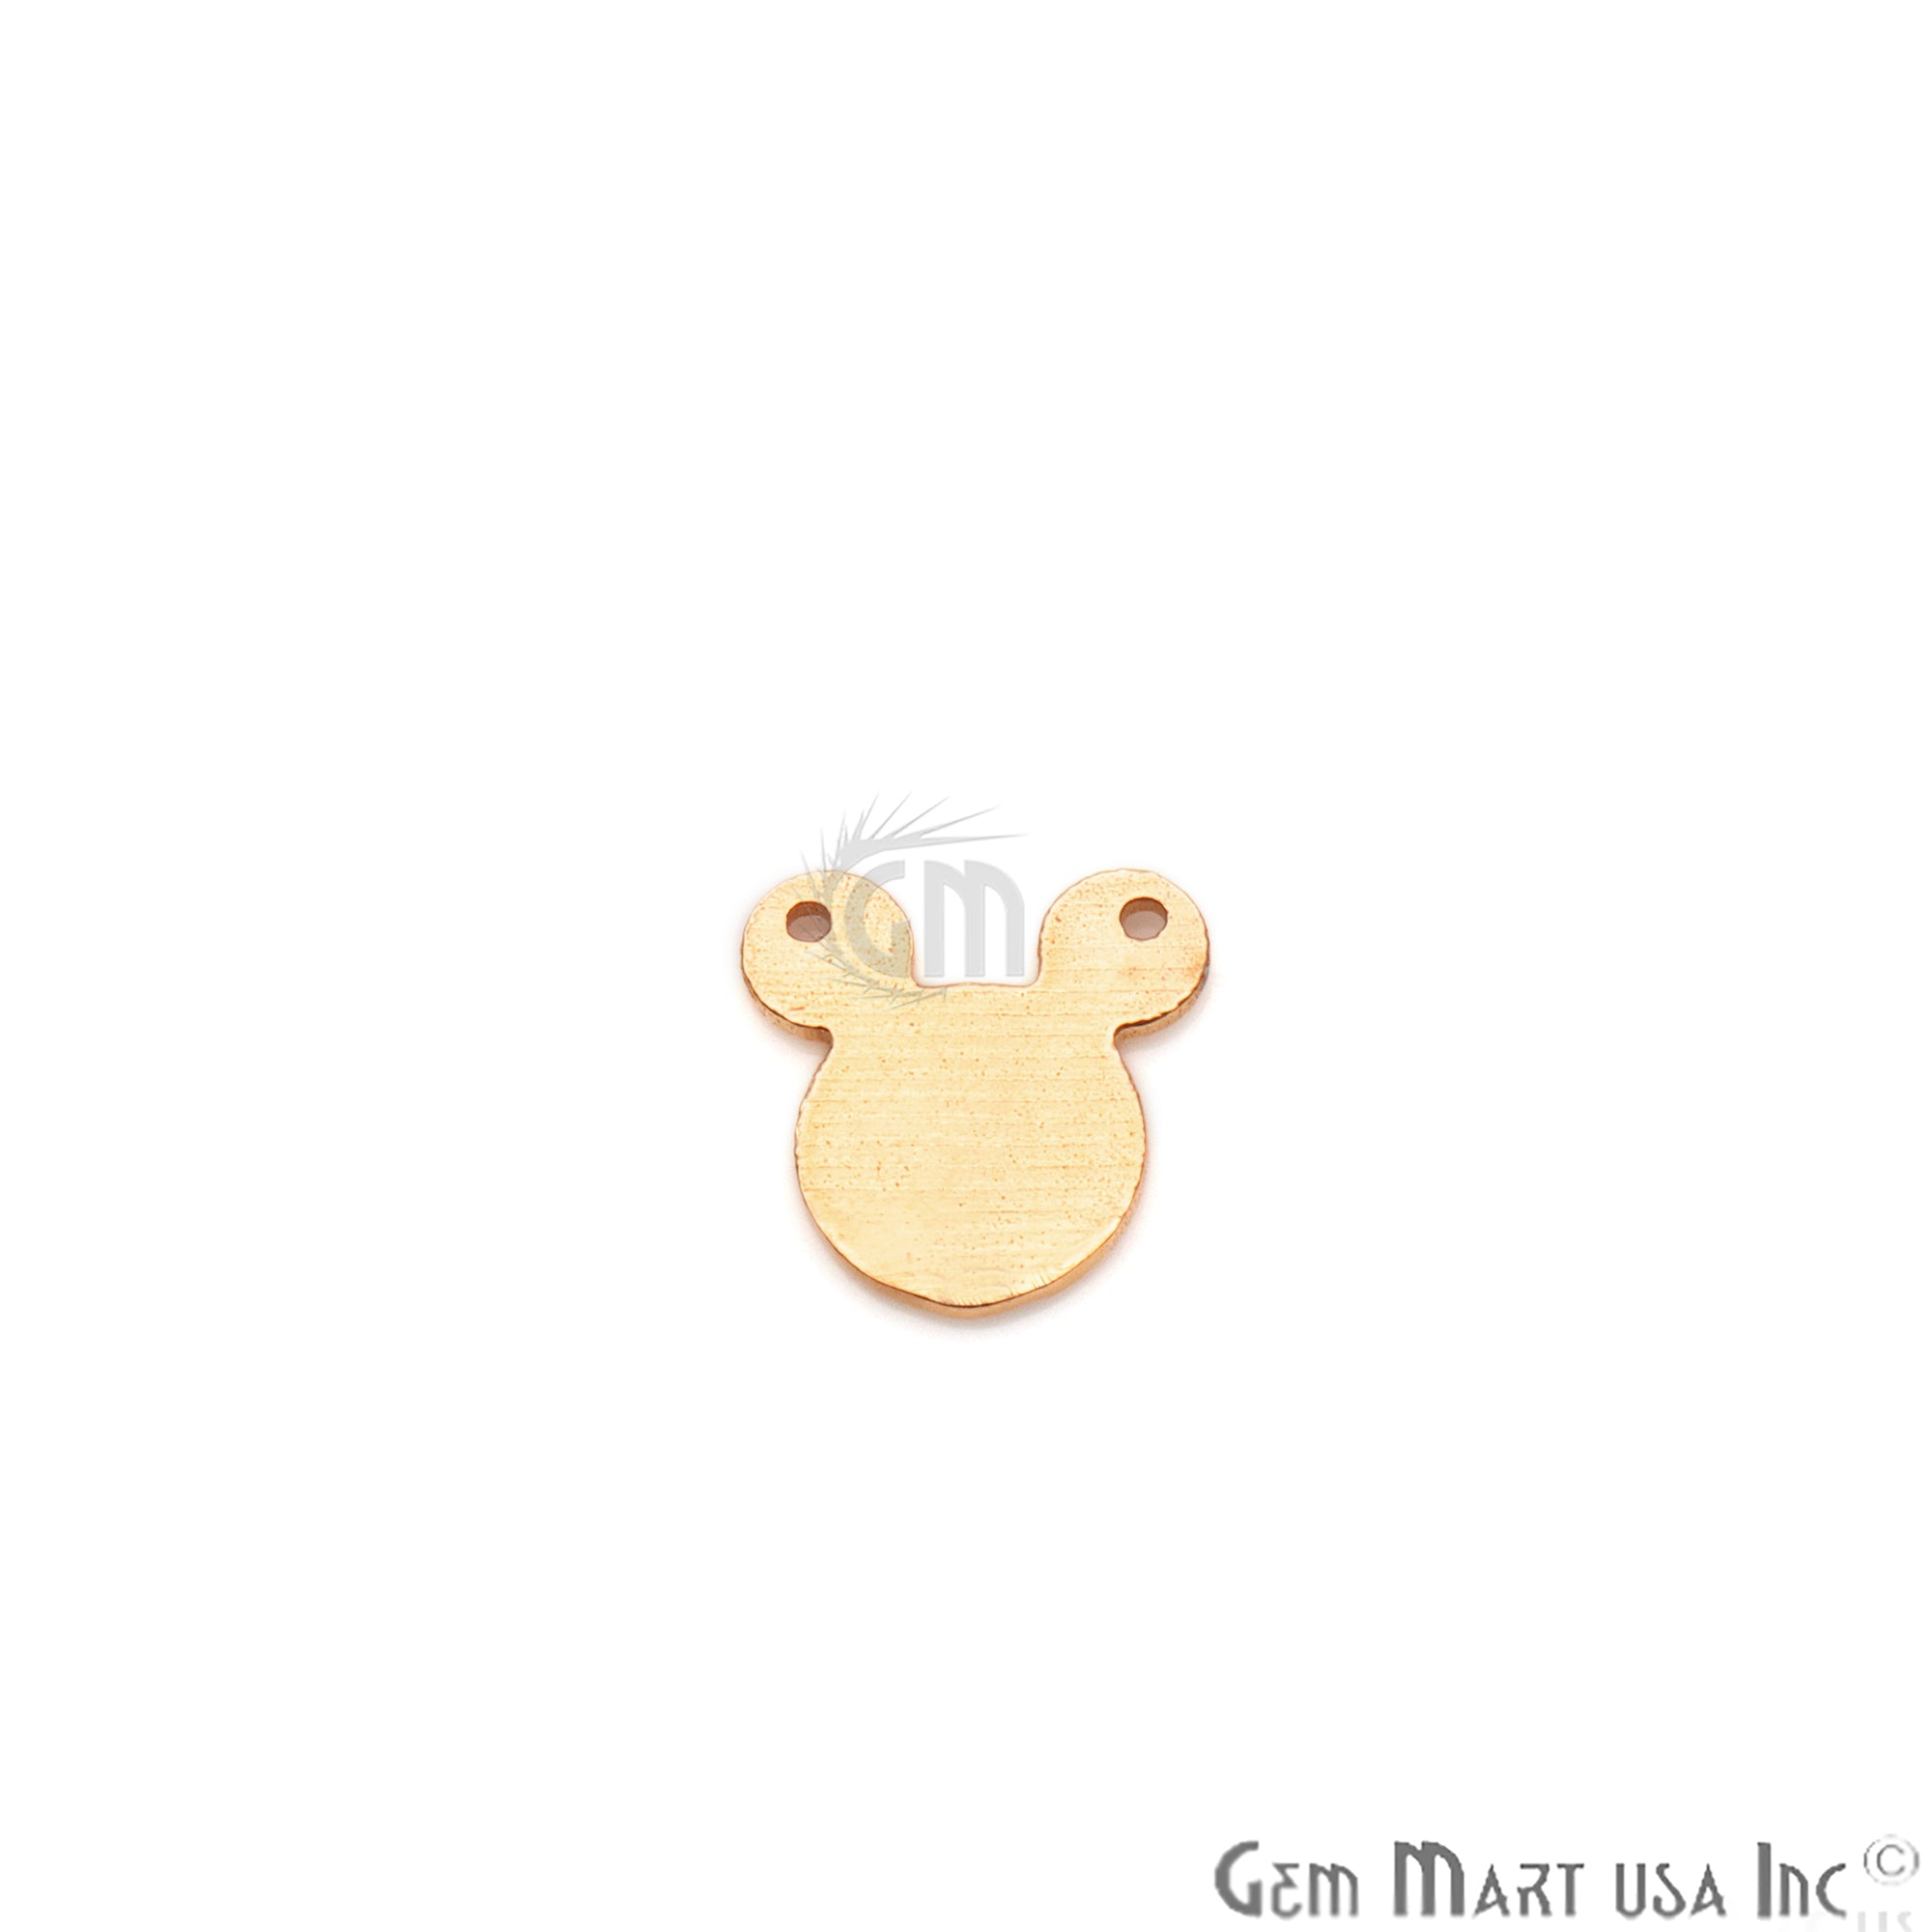 Micky Face Shape 13x10mm Gold Plated Finding Charm, DIY Jewelry - GemMartUSA